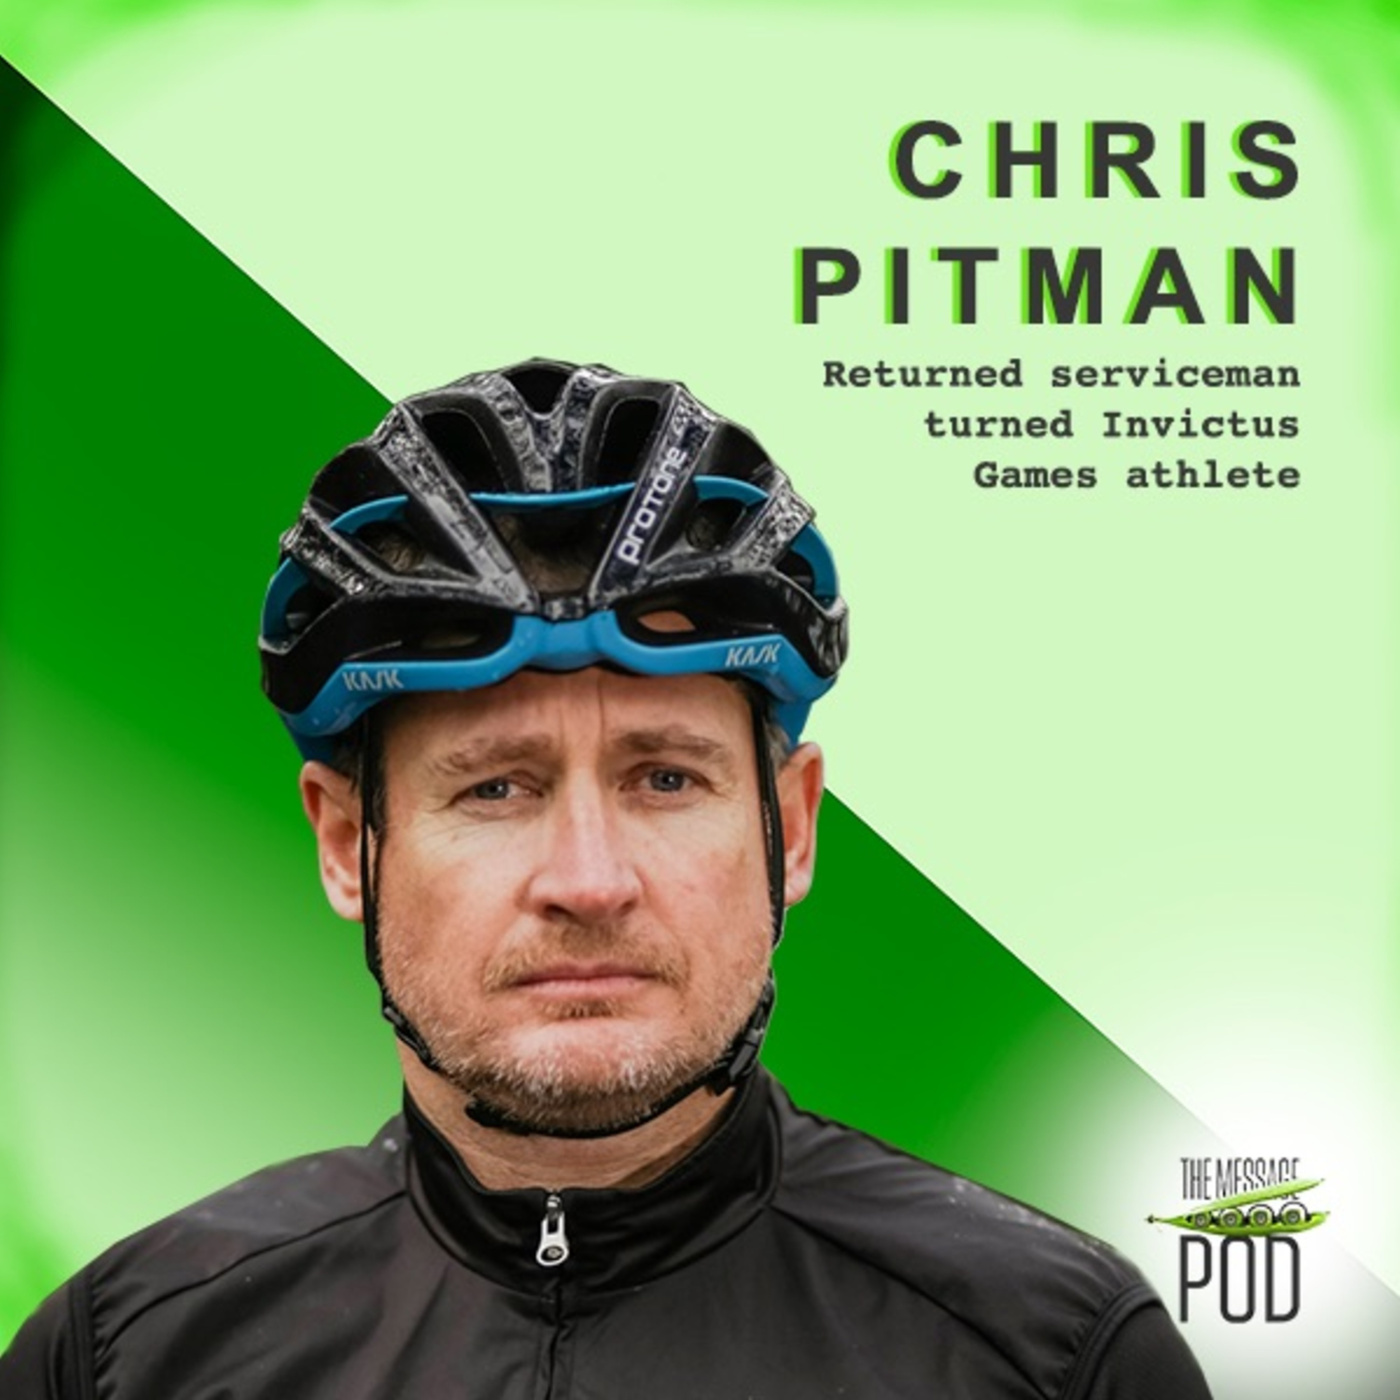 #58 Chris Pitman - Invictus Games athlete on PTSD and mental resilience